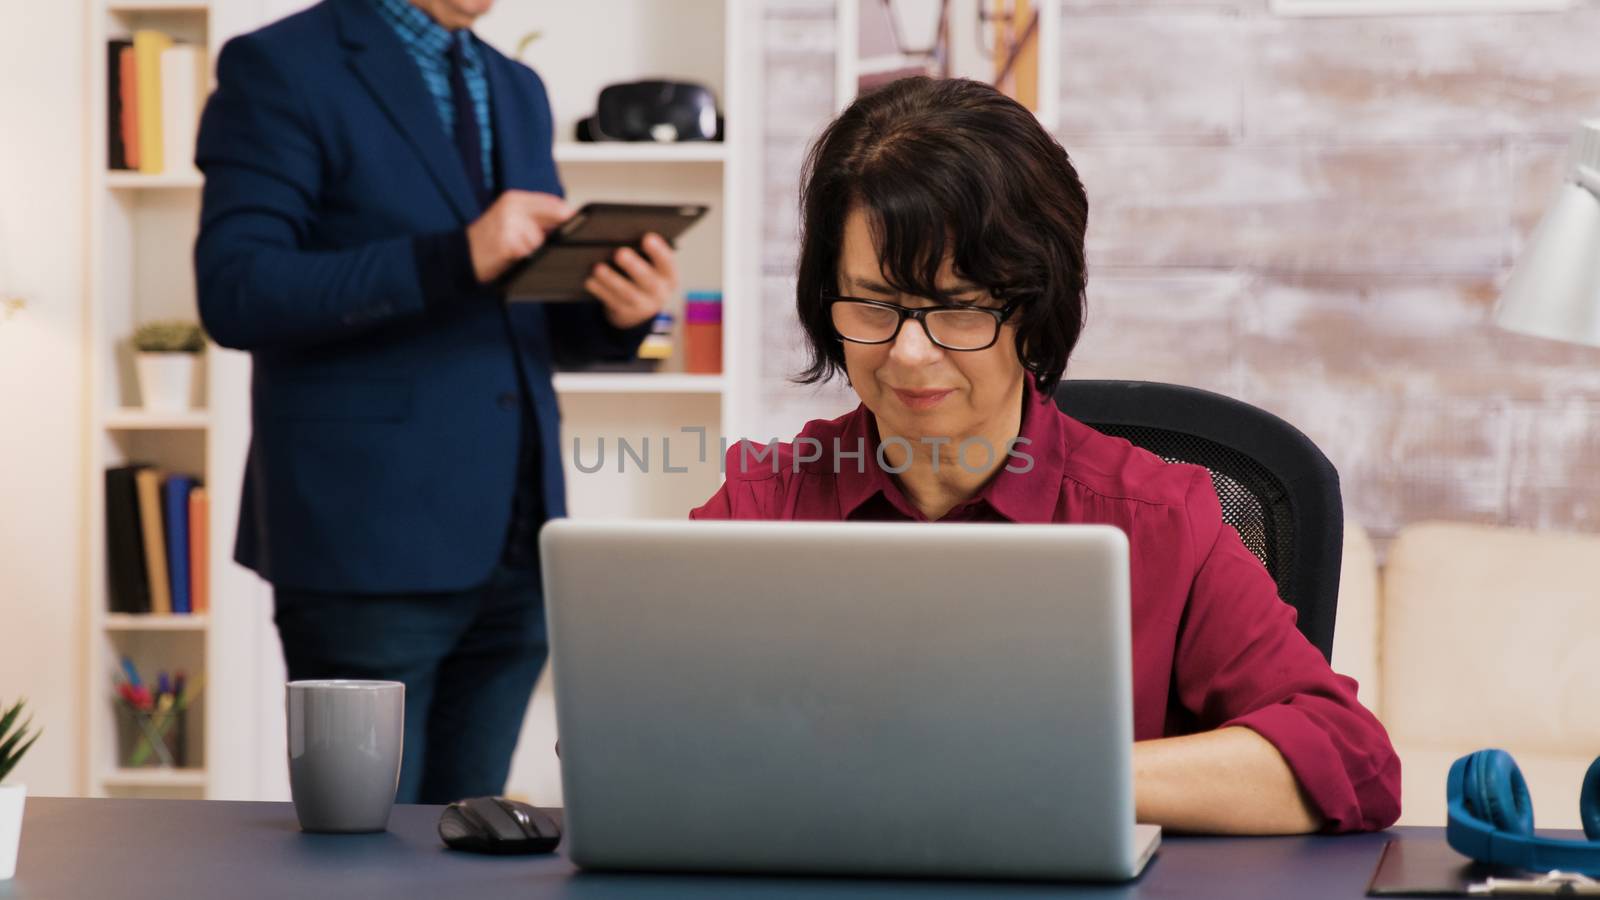 Retired woman working on laptop in living room while her husband is using tablet in the background.